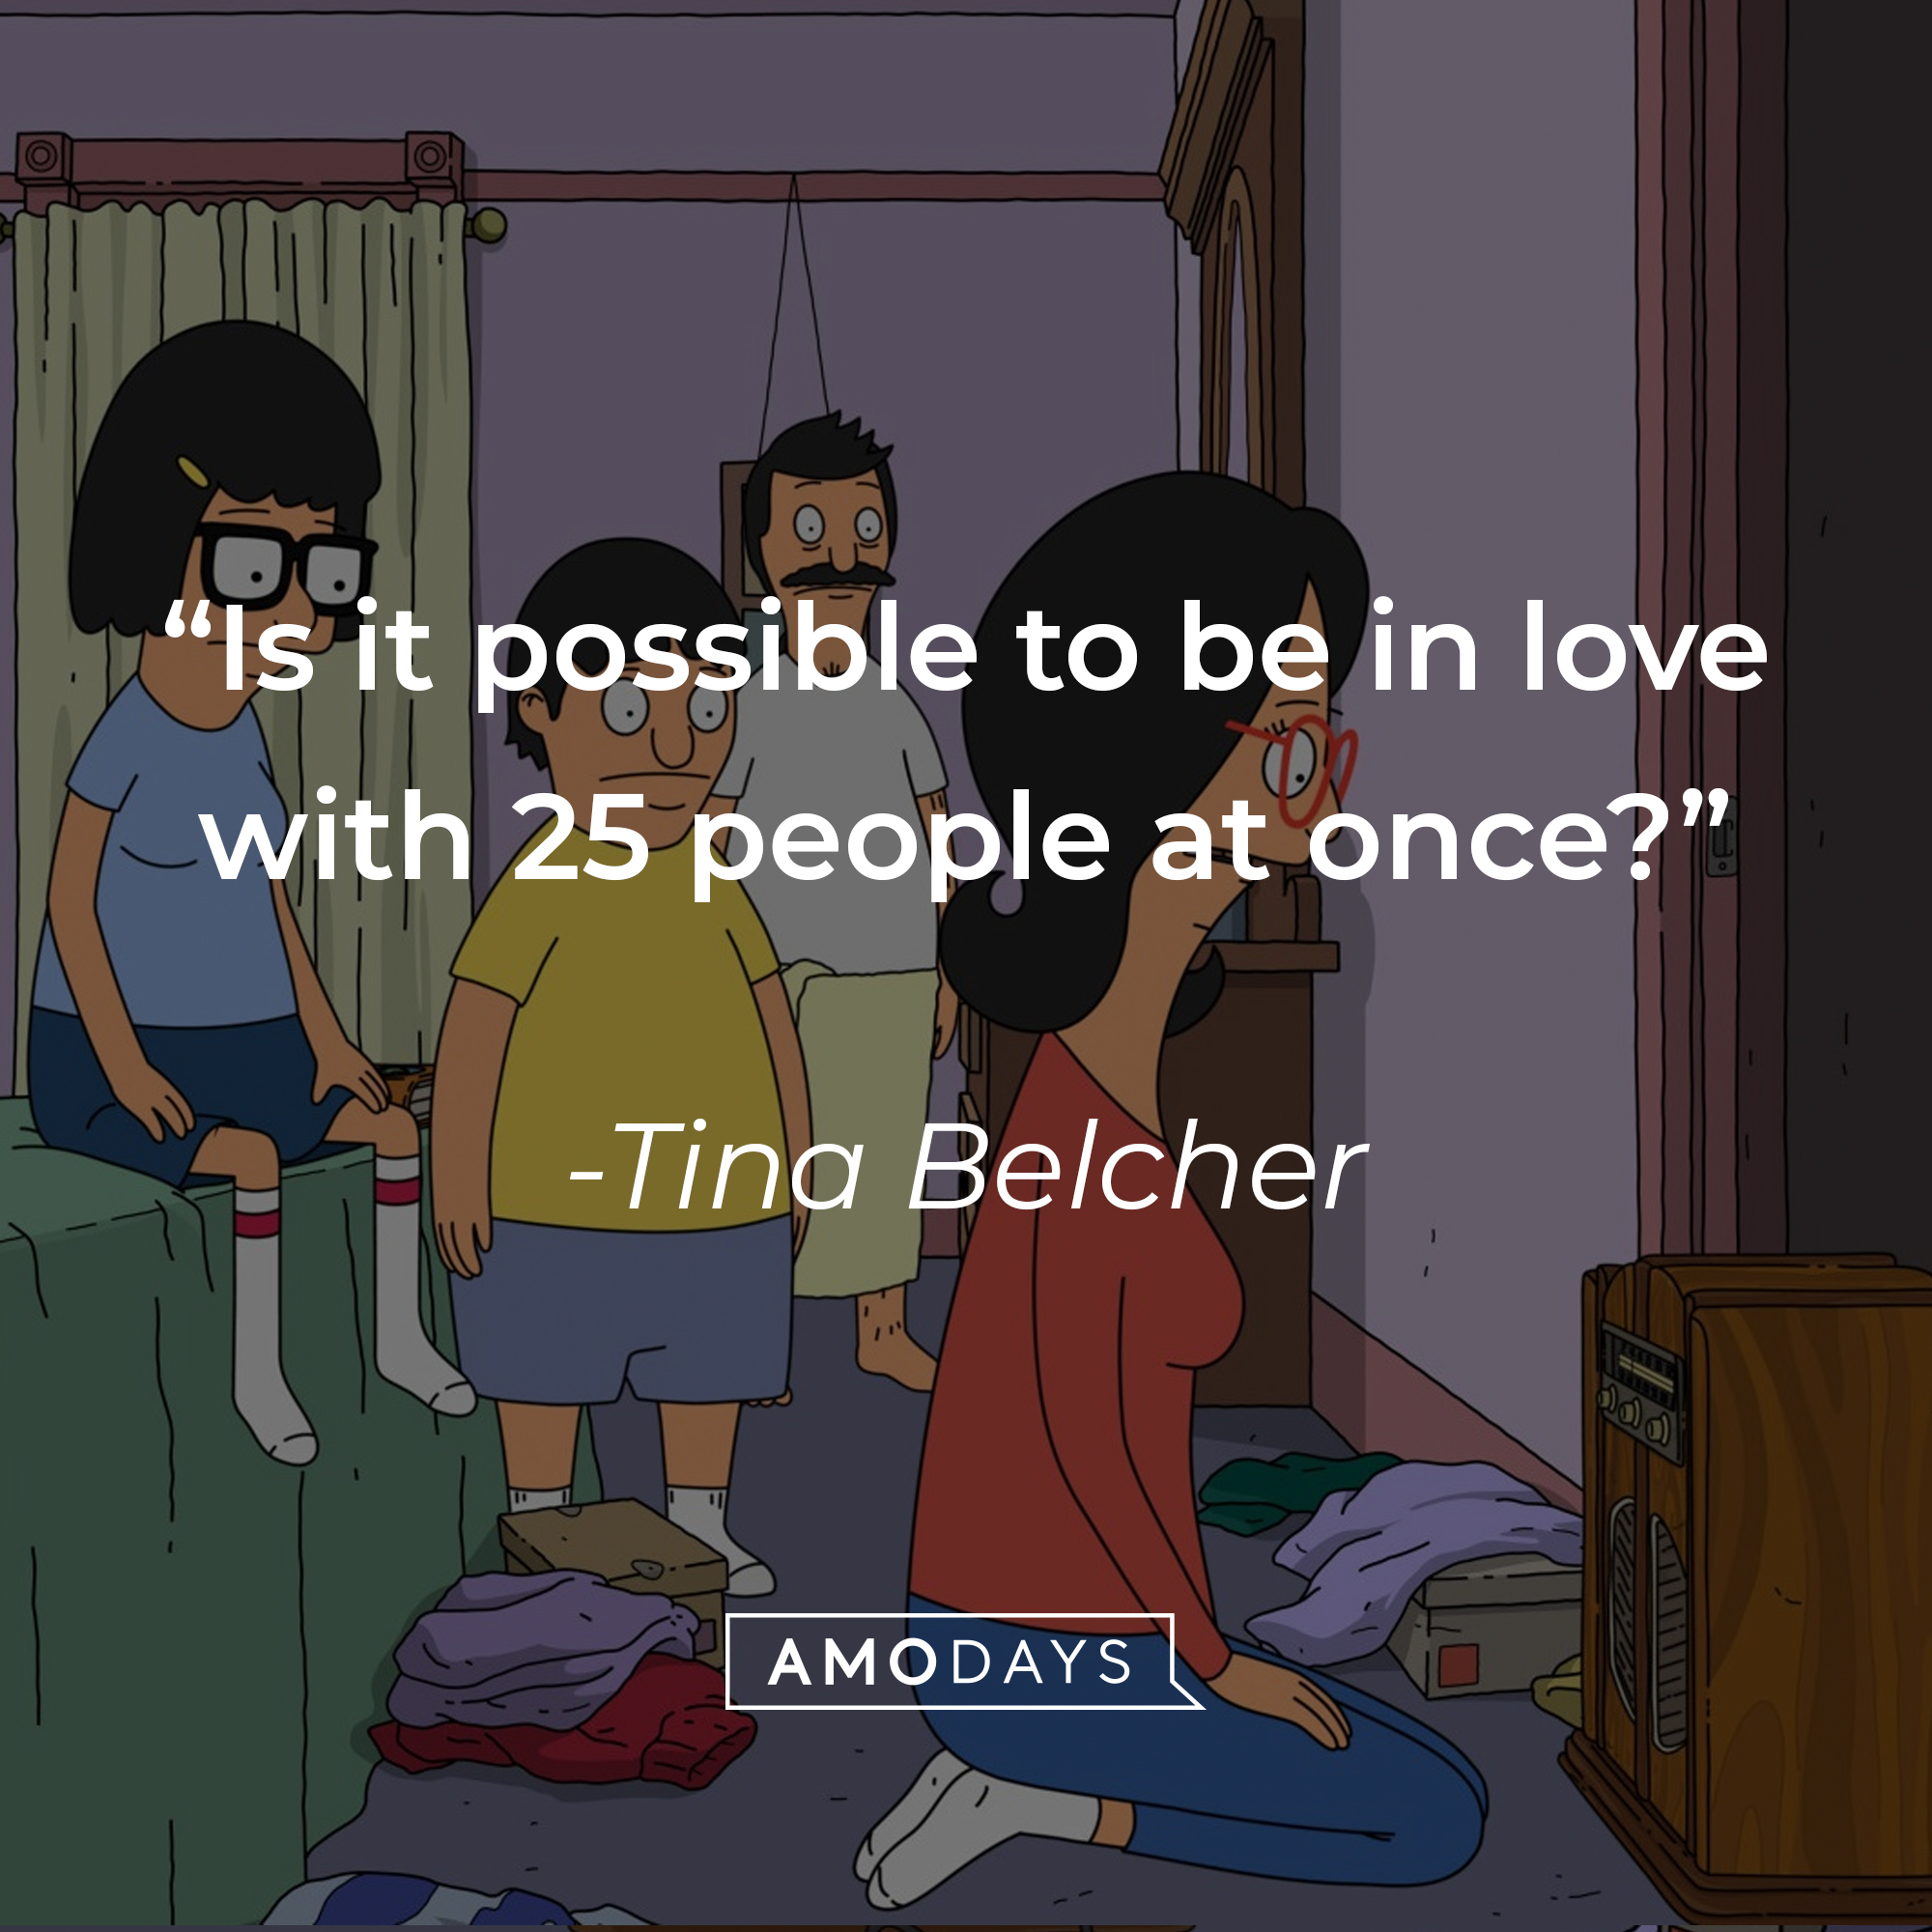 An Image of Tina Belcher and other characters from “Bob’s Burgers’s with her quote: “Is it possible to be in love with 25 people at once?” | Source: Facebook.com/BobsBurgers